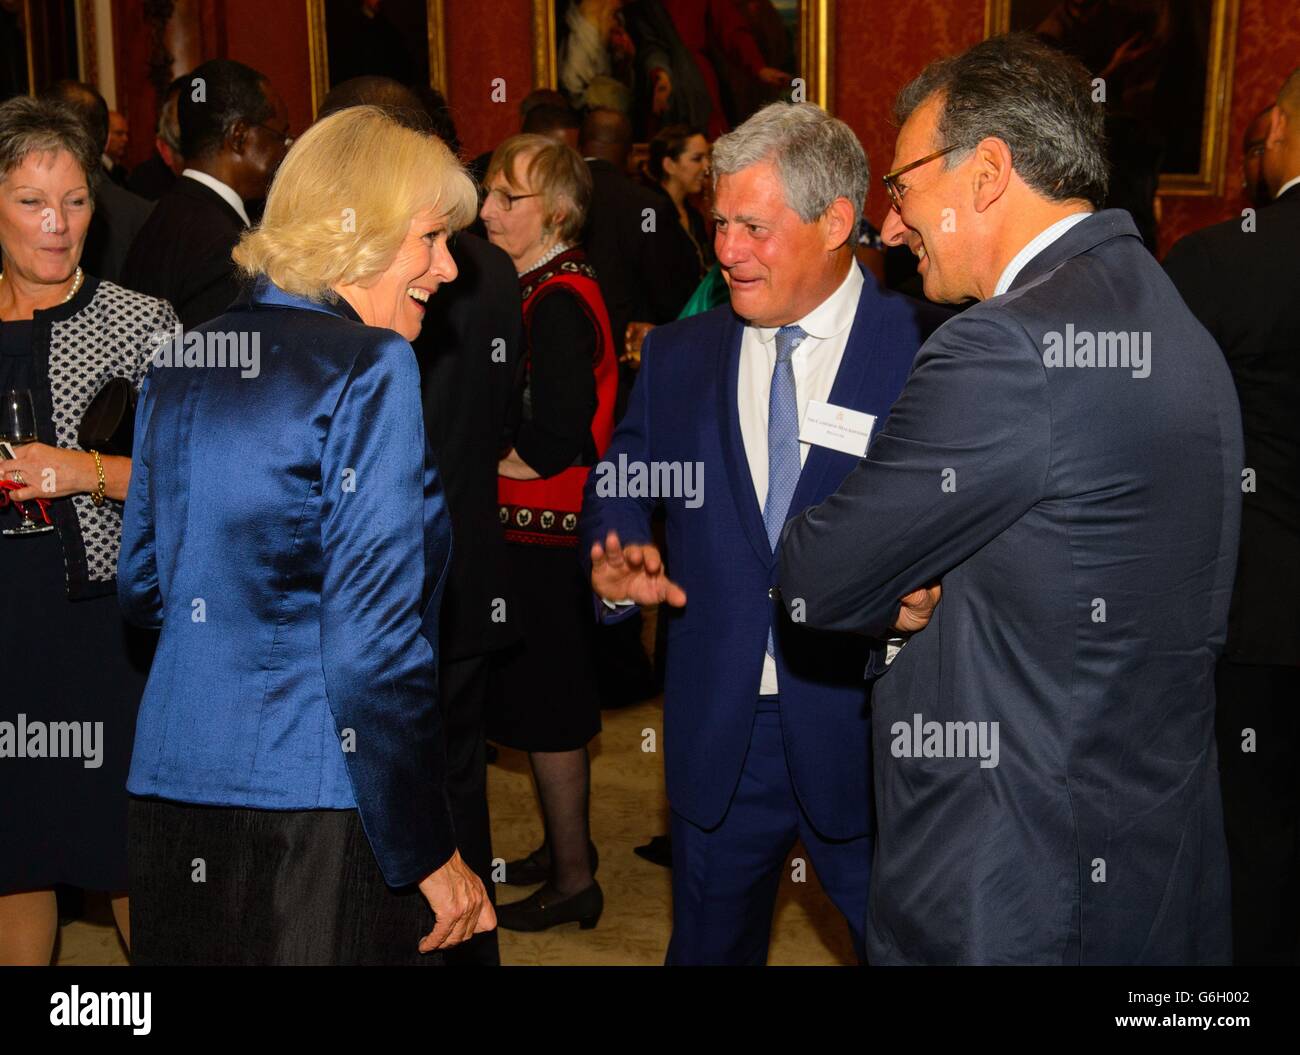 The Duchess of Cornwall speaks to Theatre Producer Cameron Mackintosh (centre) and Michael Degiorgio of the Greenhouse Charity (right) at a reception for Commonwealth nations representatives, at Buckingham Palace, in central London. Stock Photo